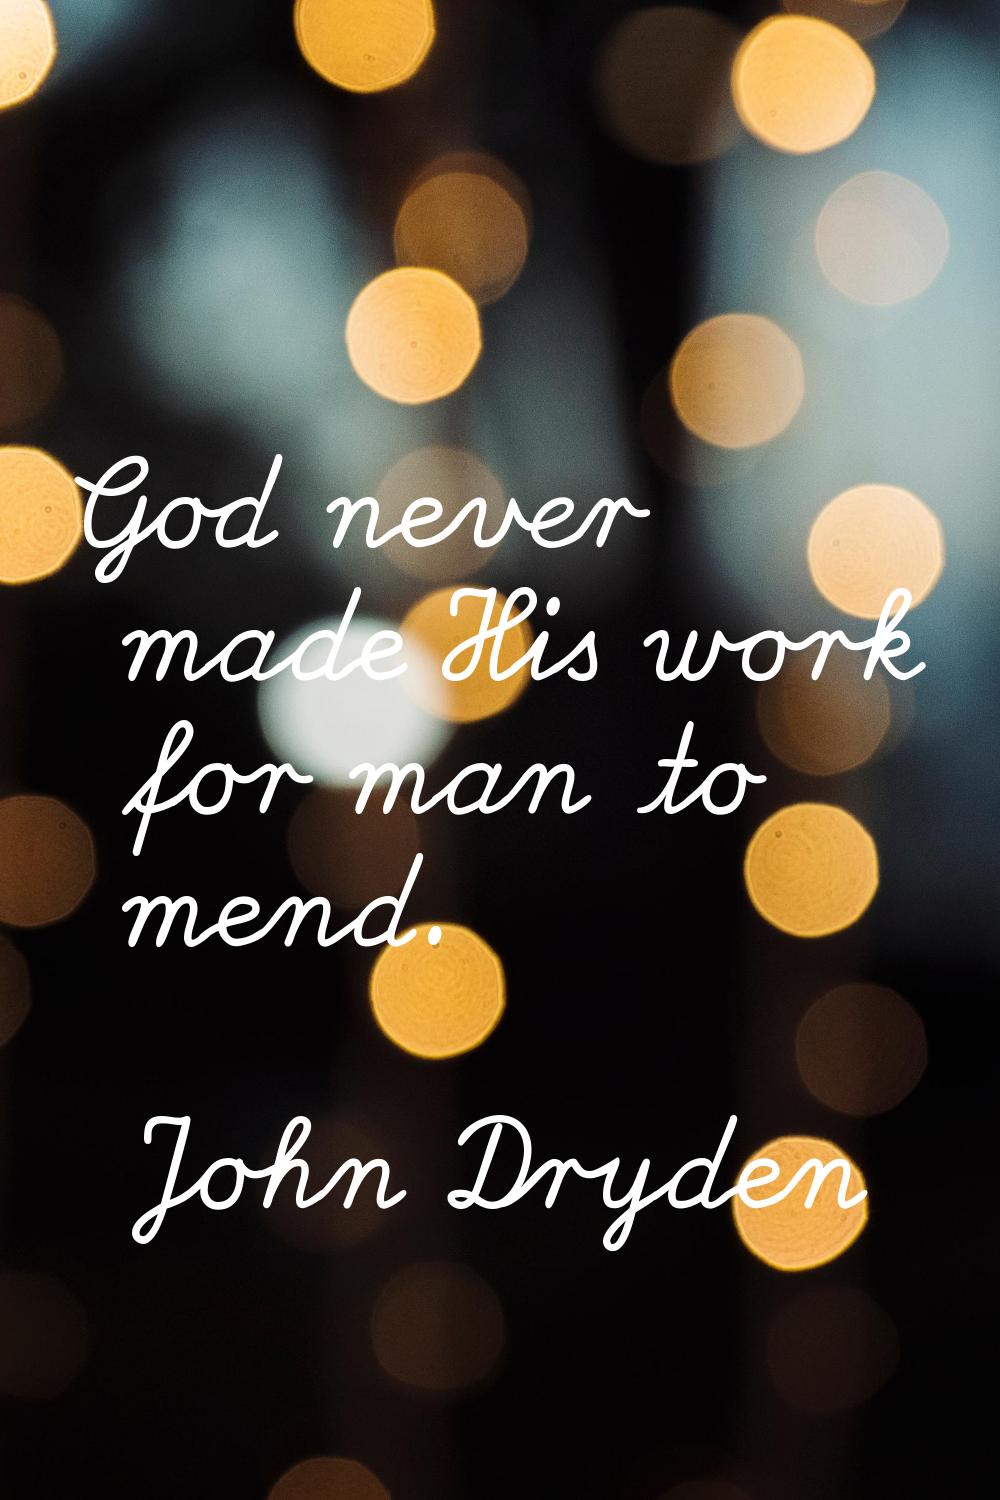 God never made His work for man to mend.